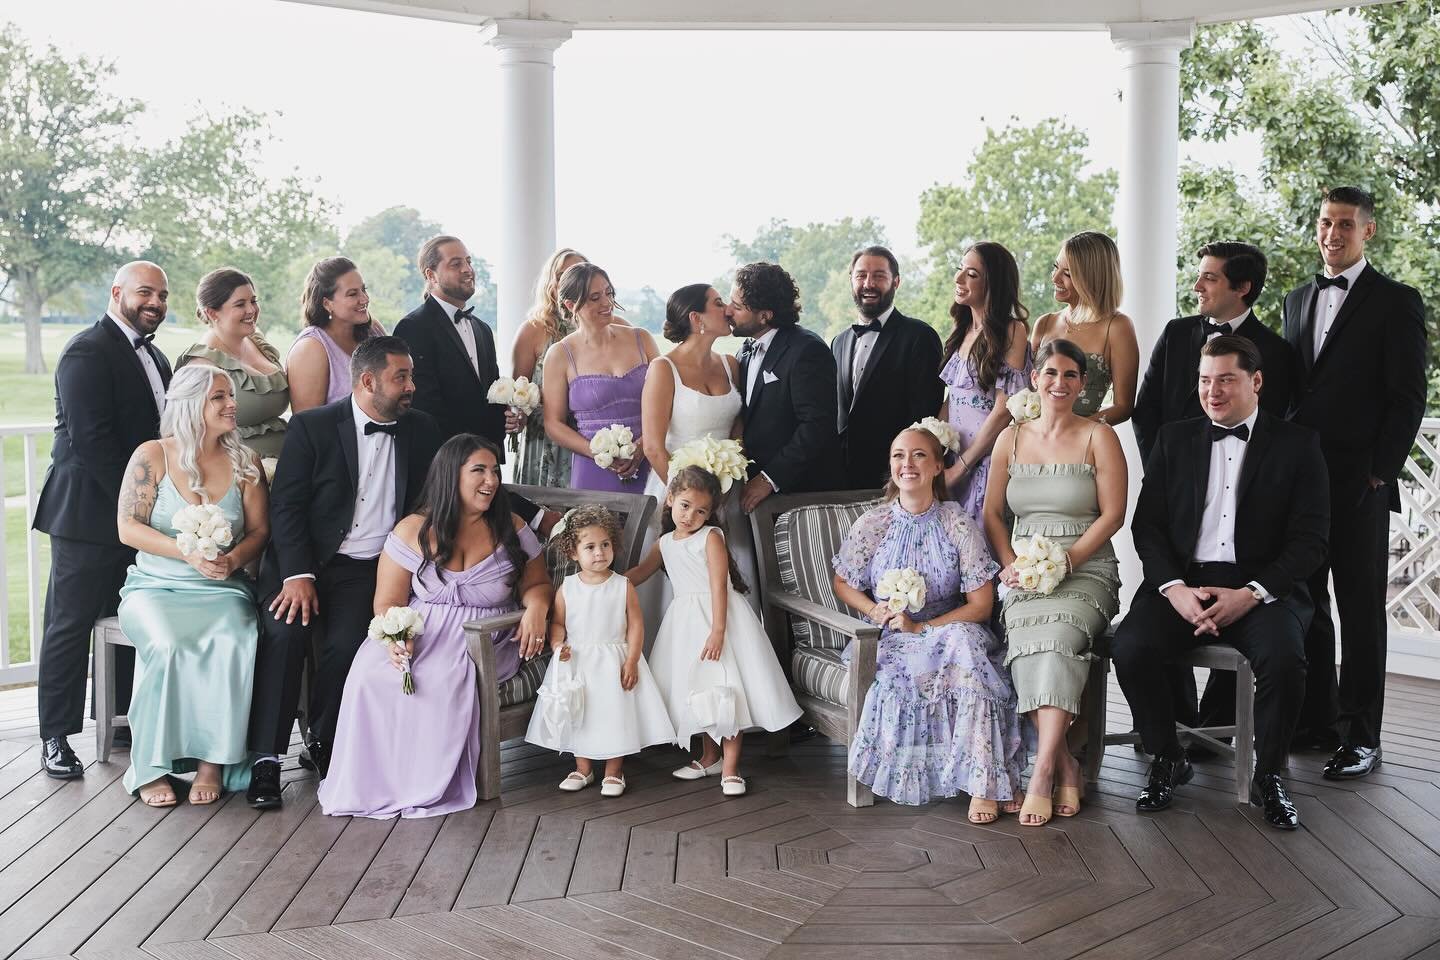 Surrounded by love 💕
.
.
.
.
.
.
#photo #photography #bridalparty #weddingday #weddingphotographer #weddingphotography #portraits #nyc